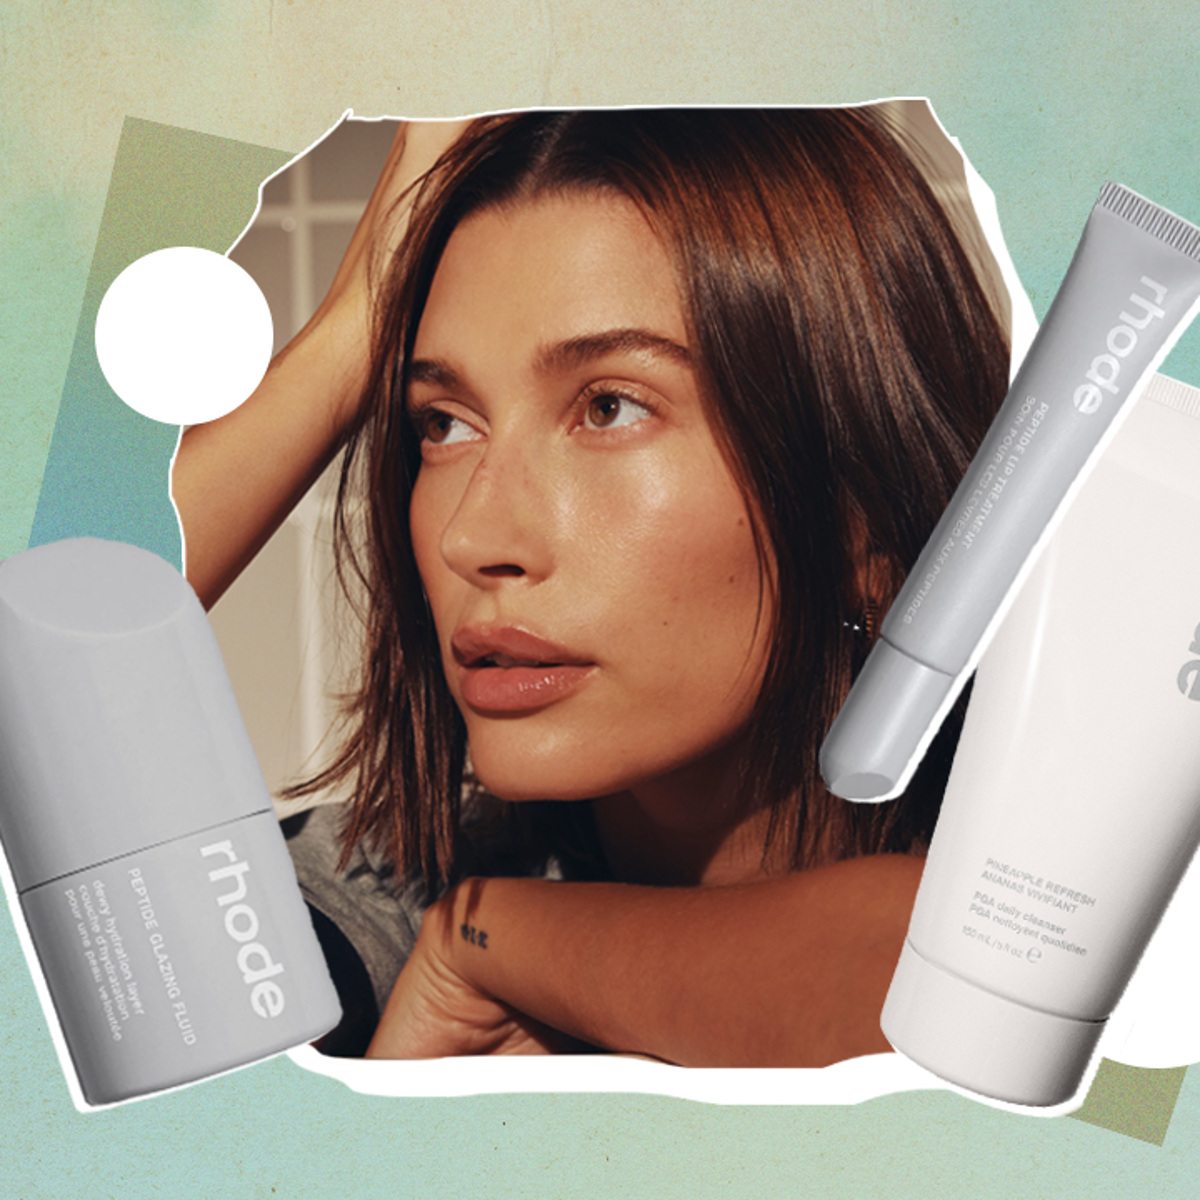 Rhode skincare review: Is Hailey Bieber's skincare brand any good